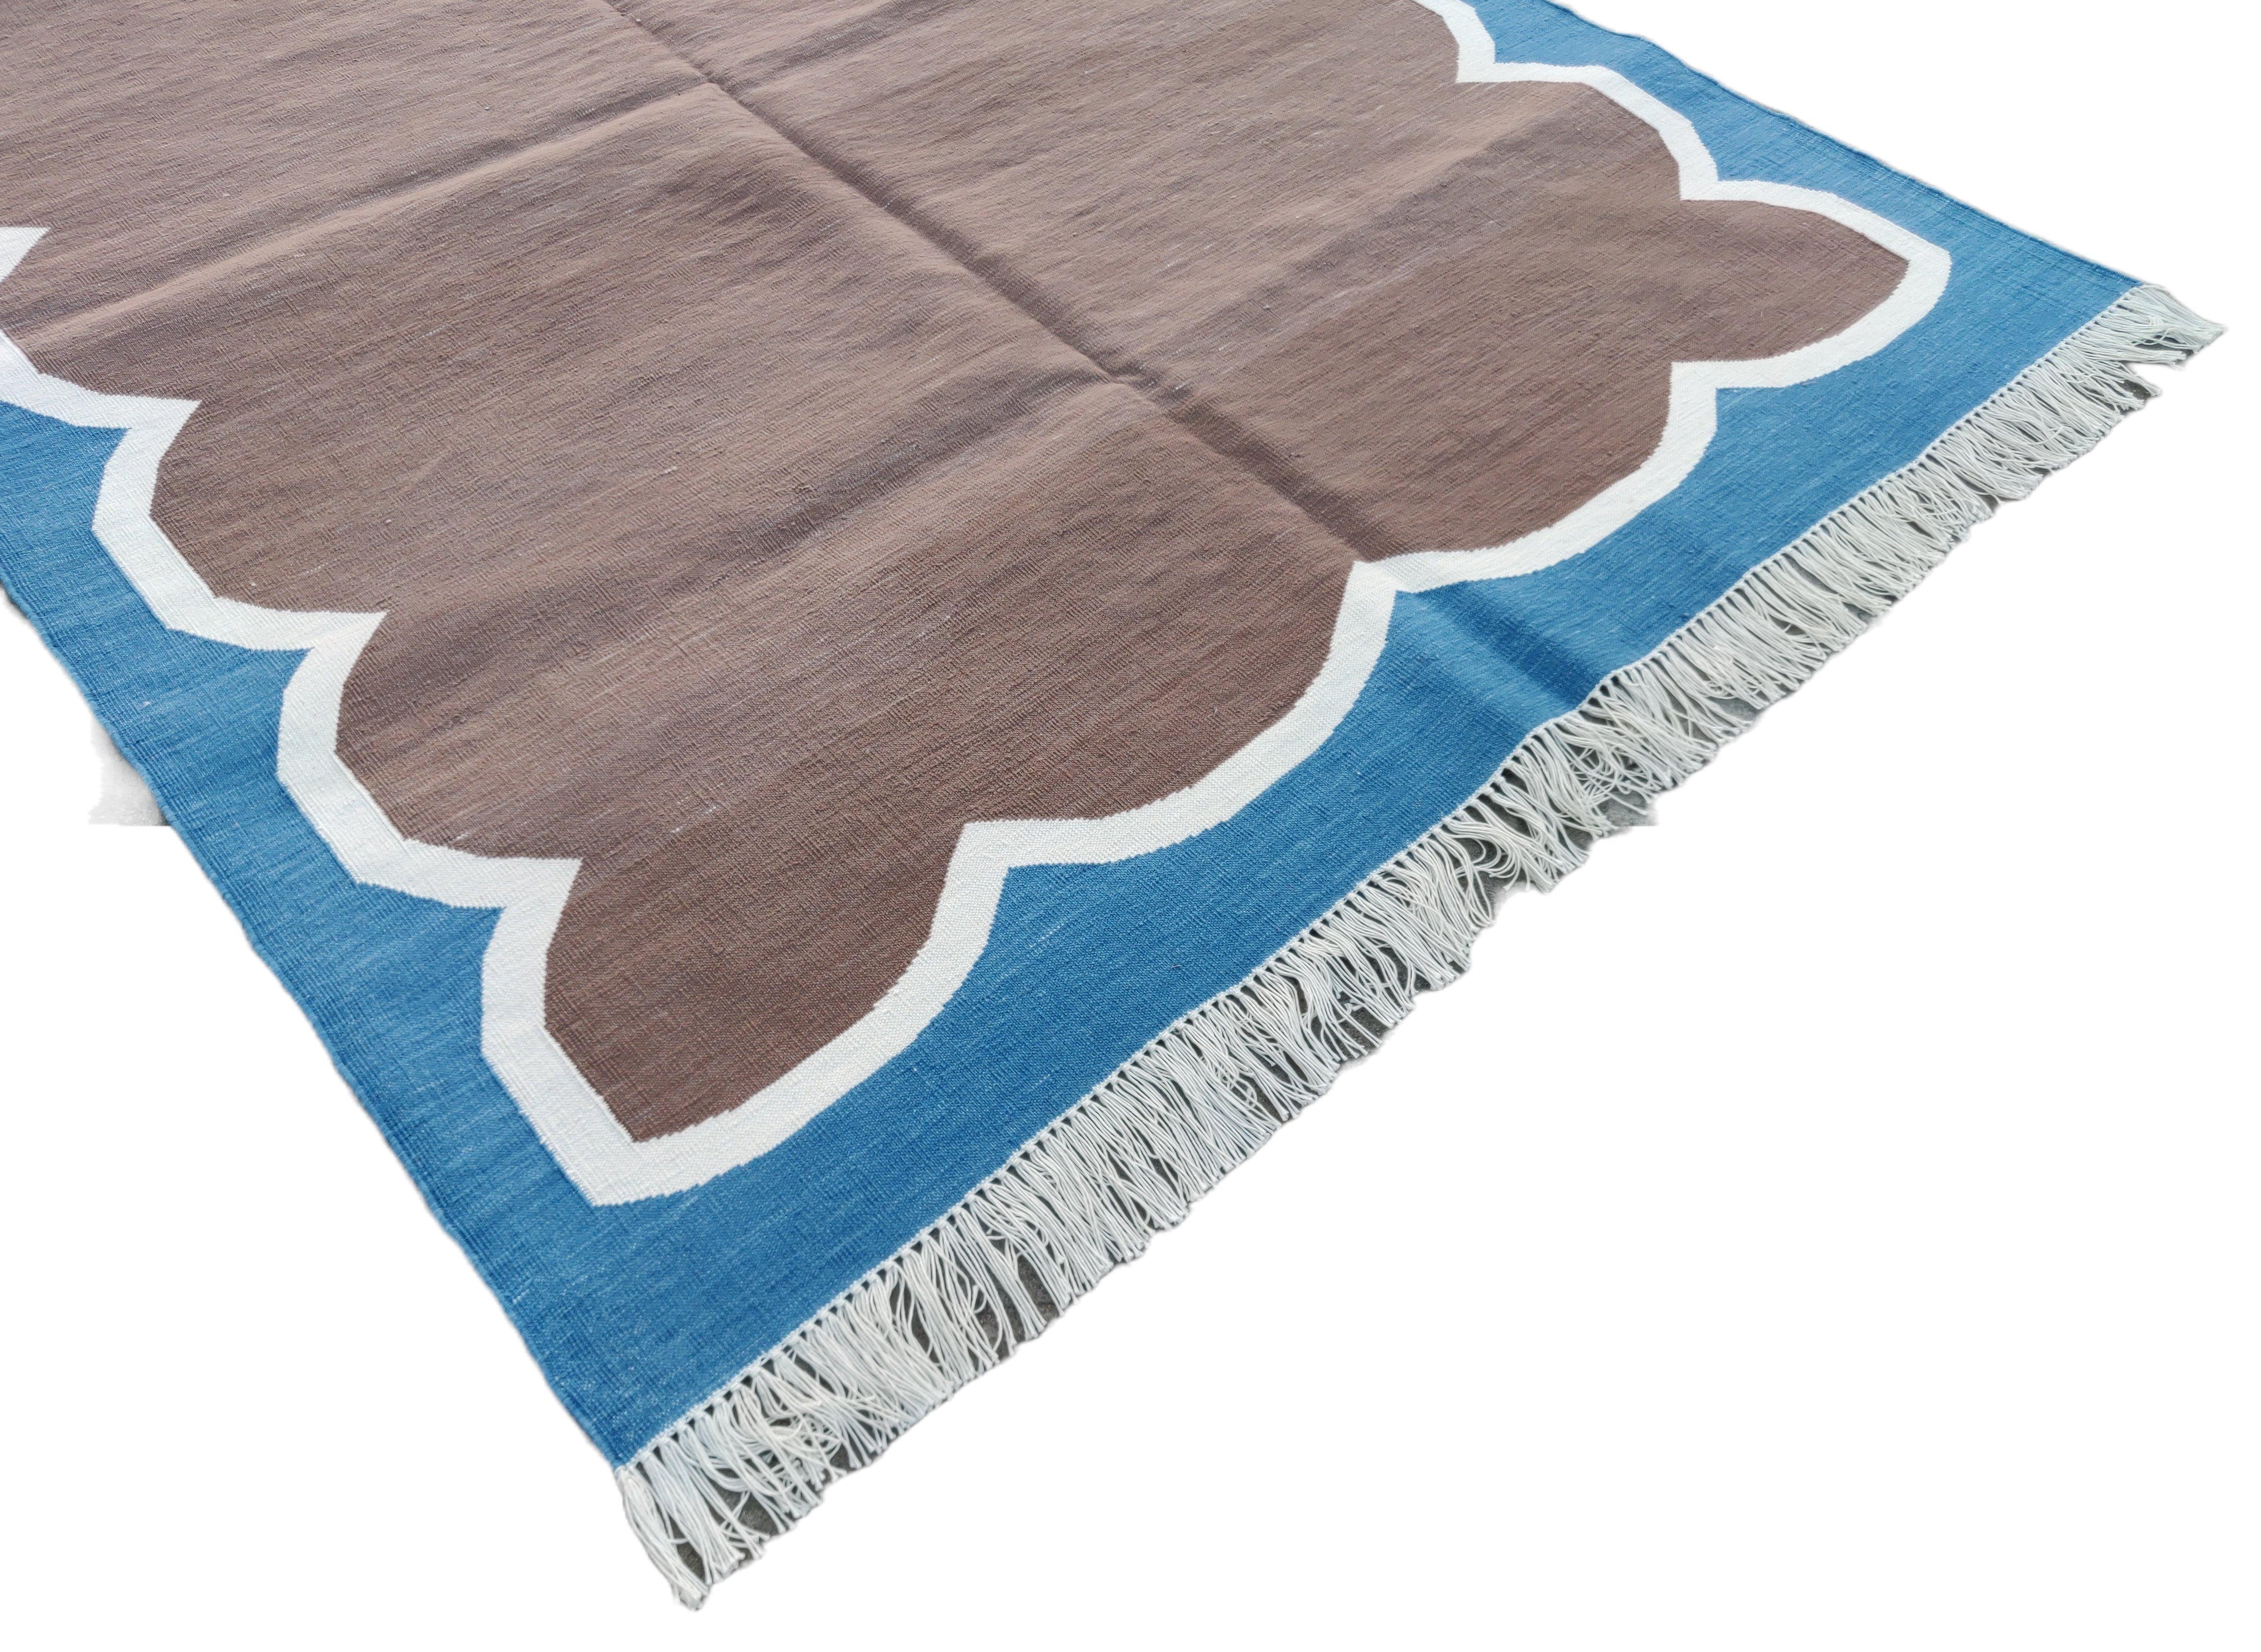 Mid-Century Modern Handmade Cotton Area Flat Weave Rug, 4x6 Brown And Blue Striped Indian Dhurrie For Sale